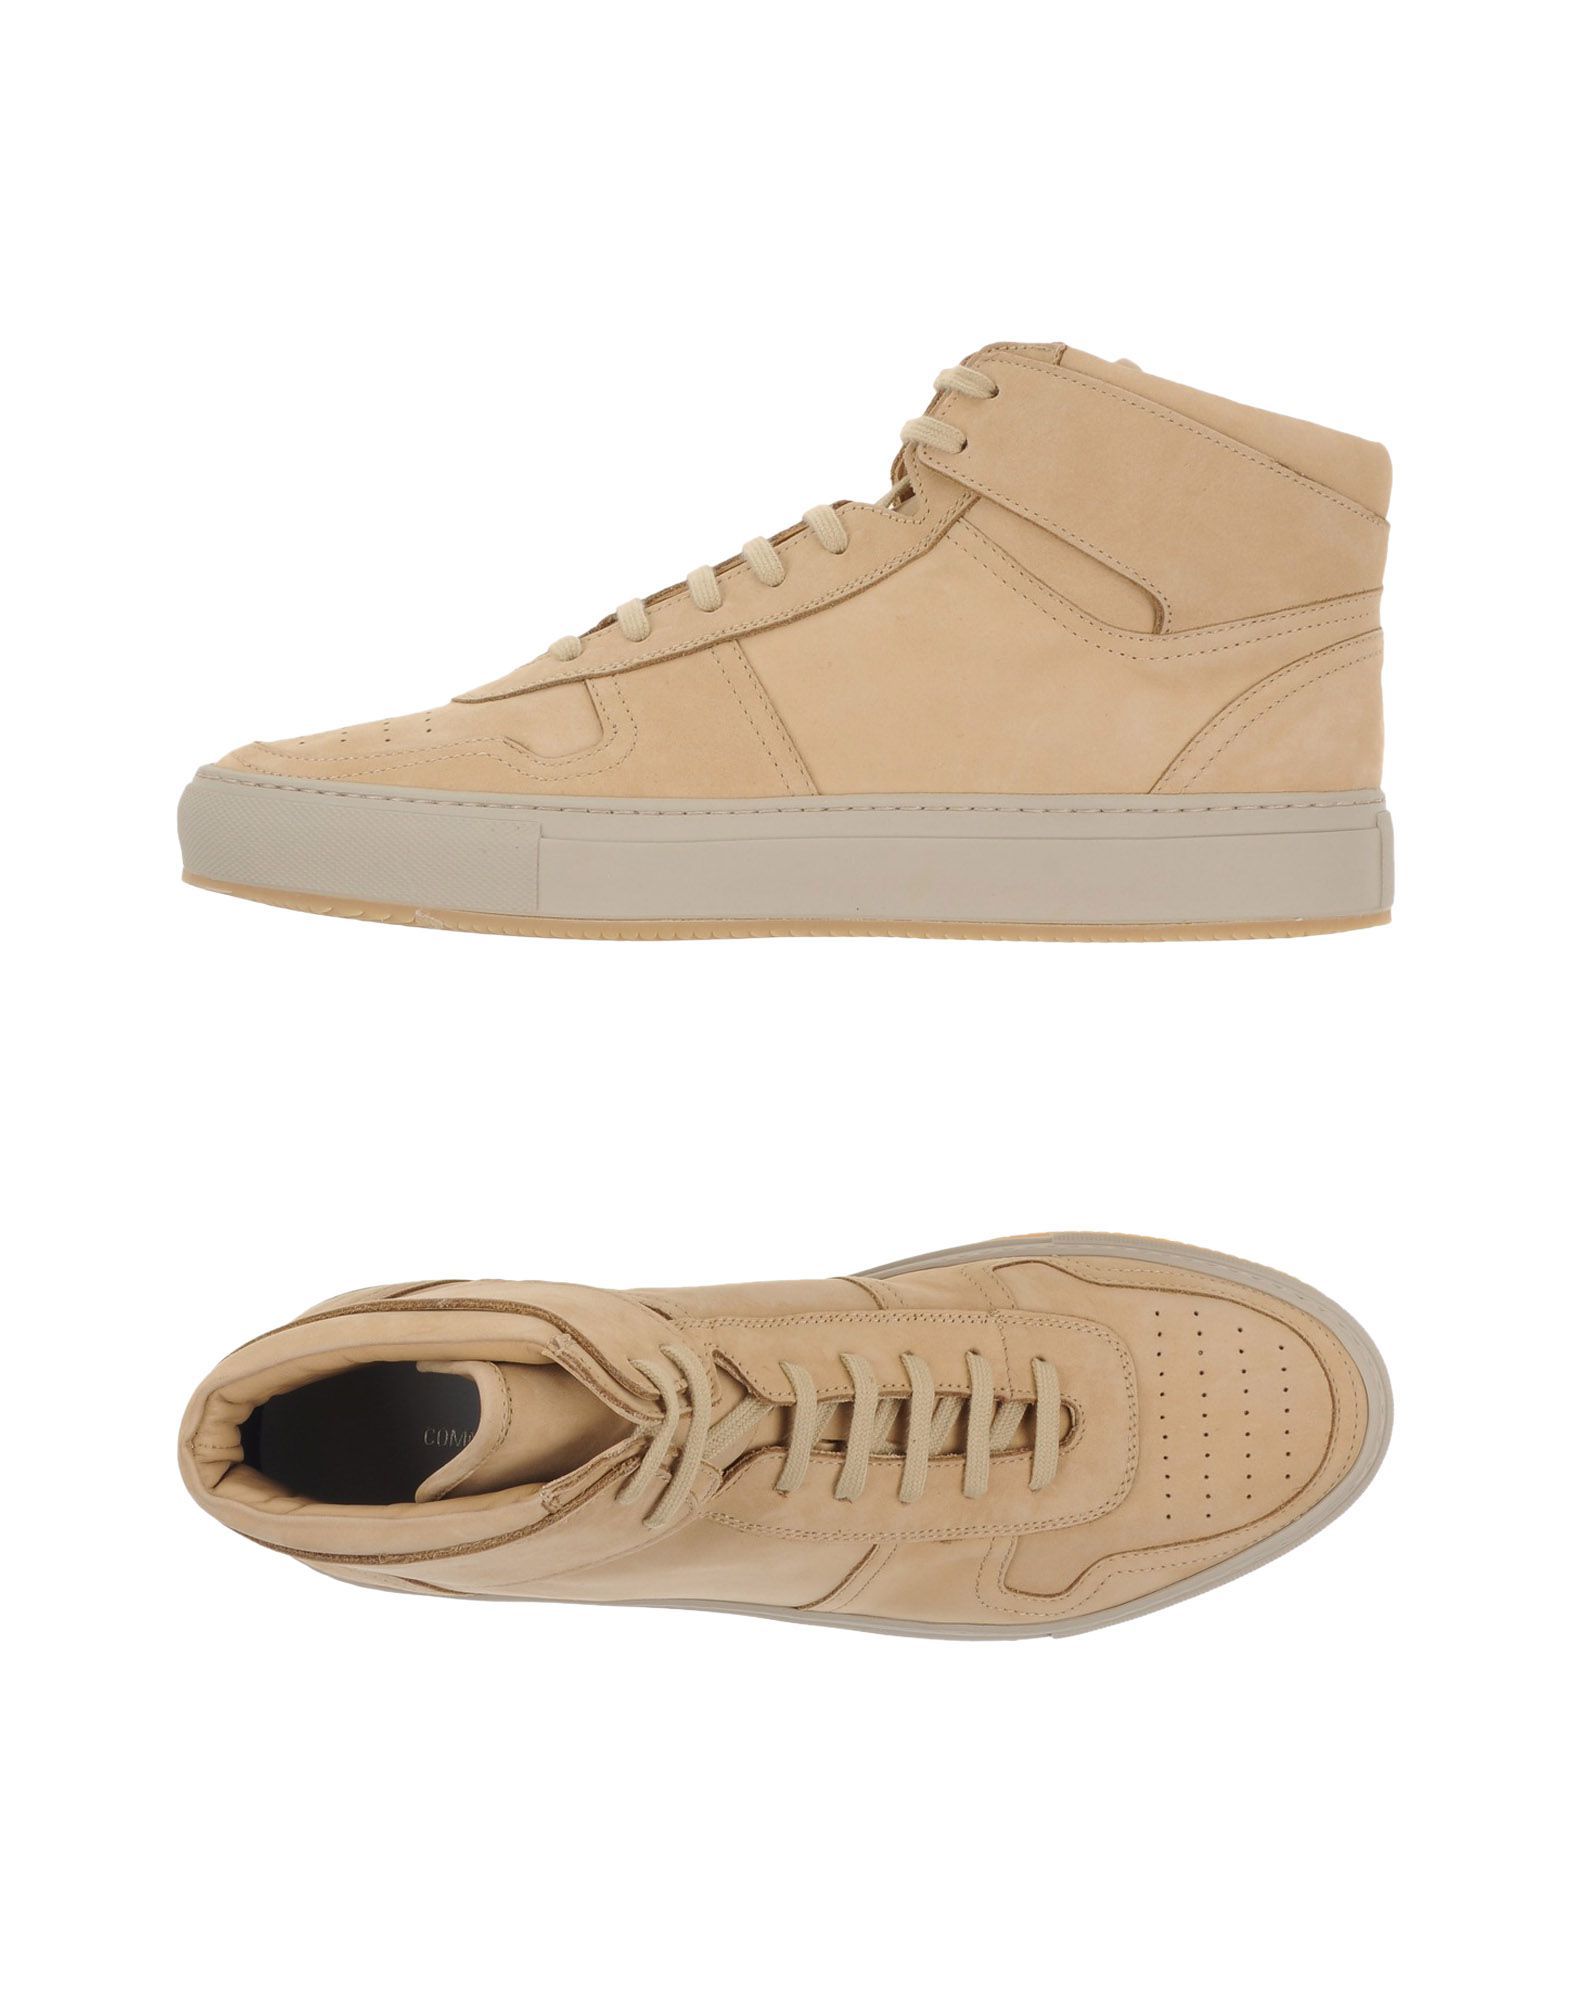 COMMON PROJECTS Sneakers | YOOX (US)